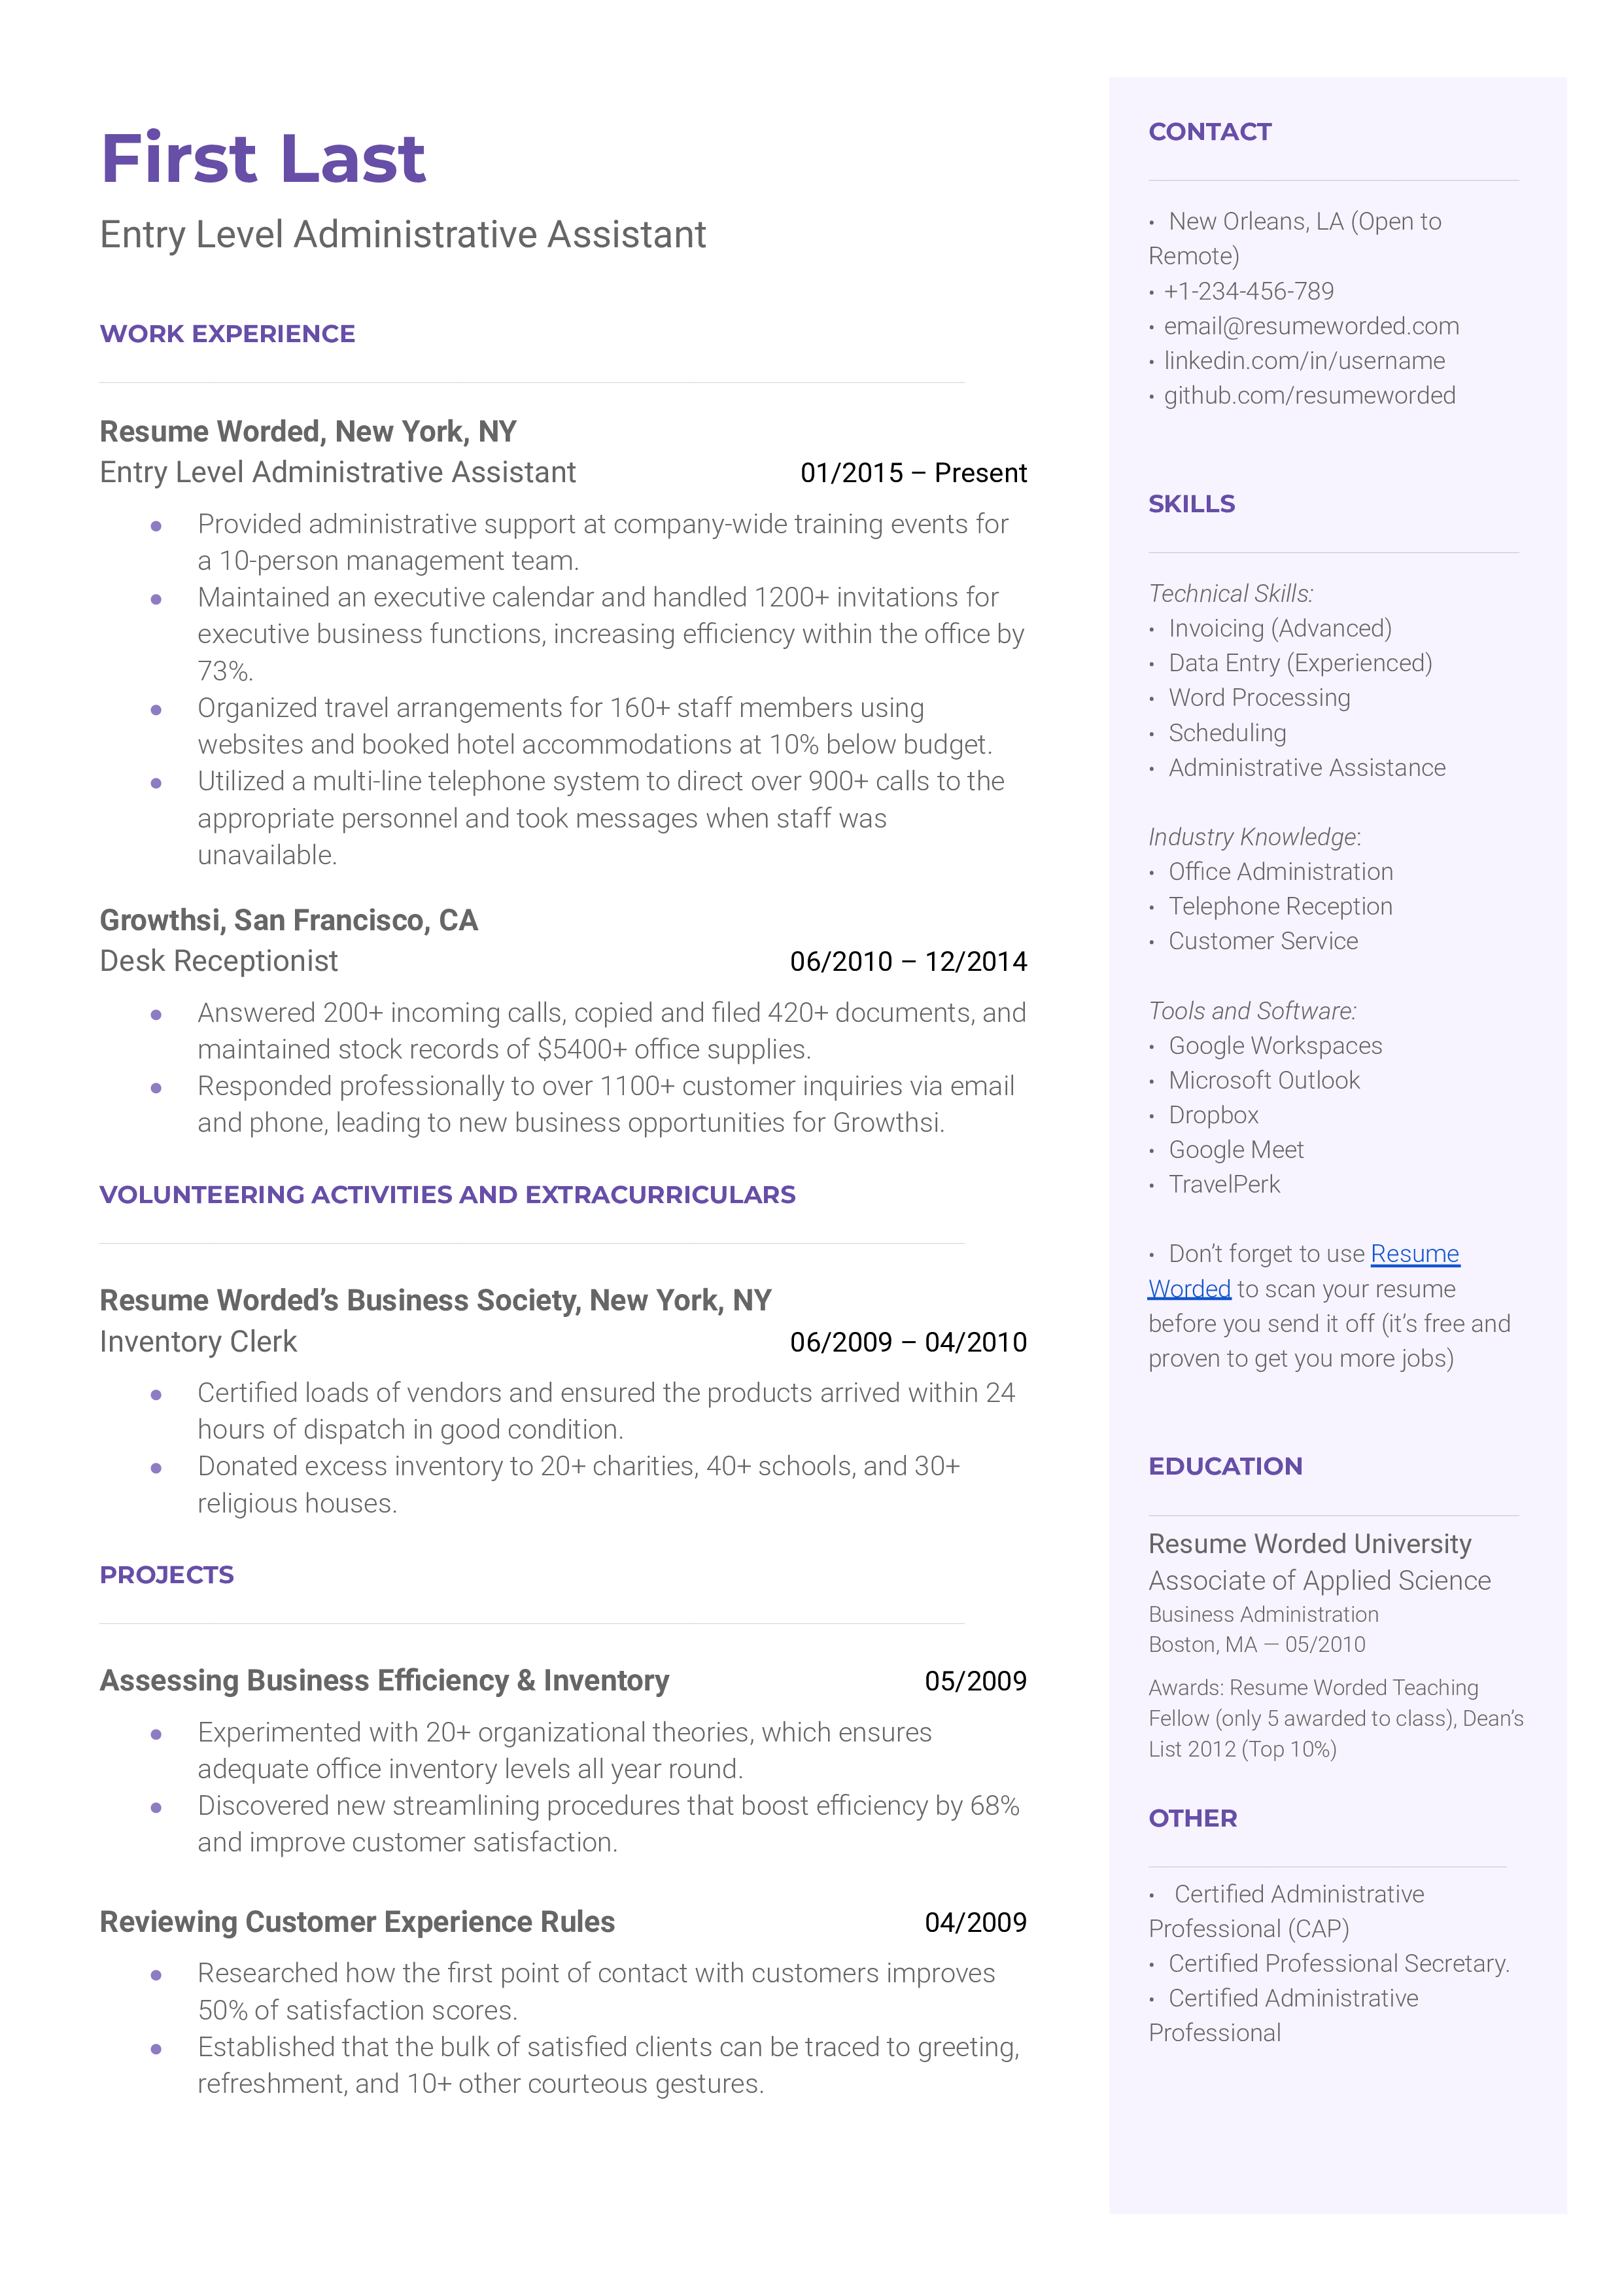 A well-organized CV for an entry-level administrative assistant showcasing organizational and tech skills.